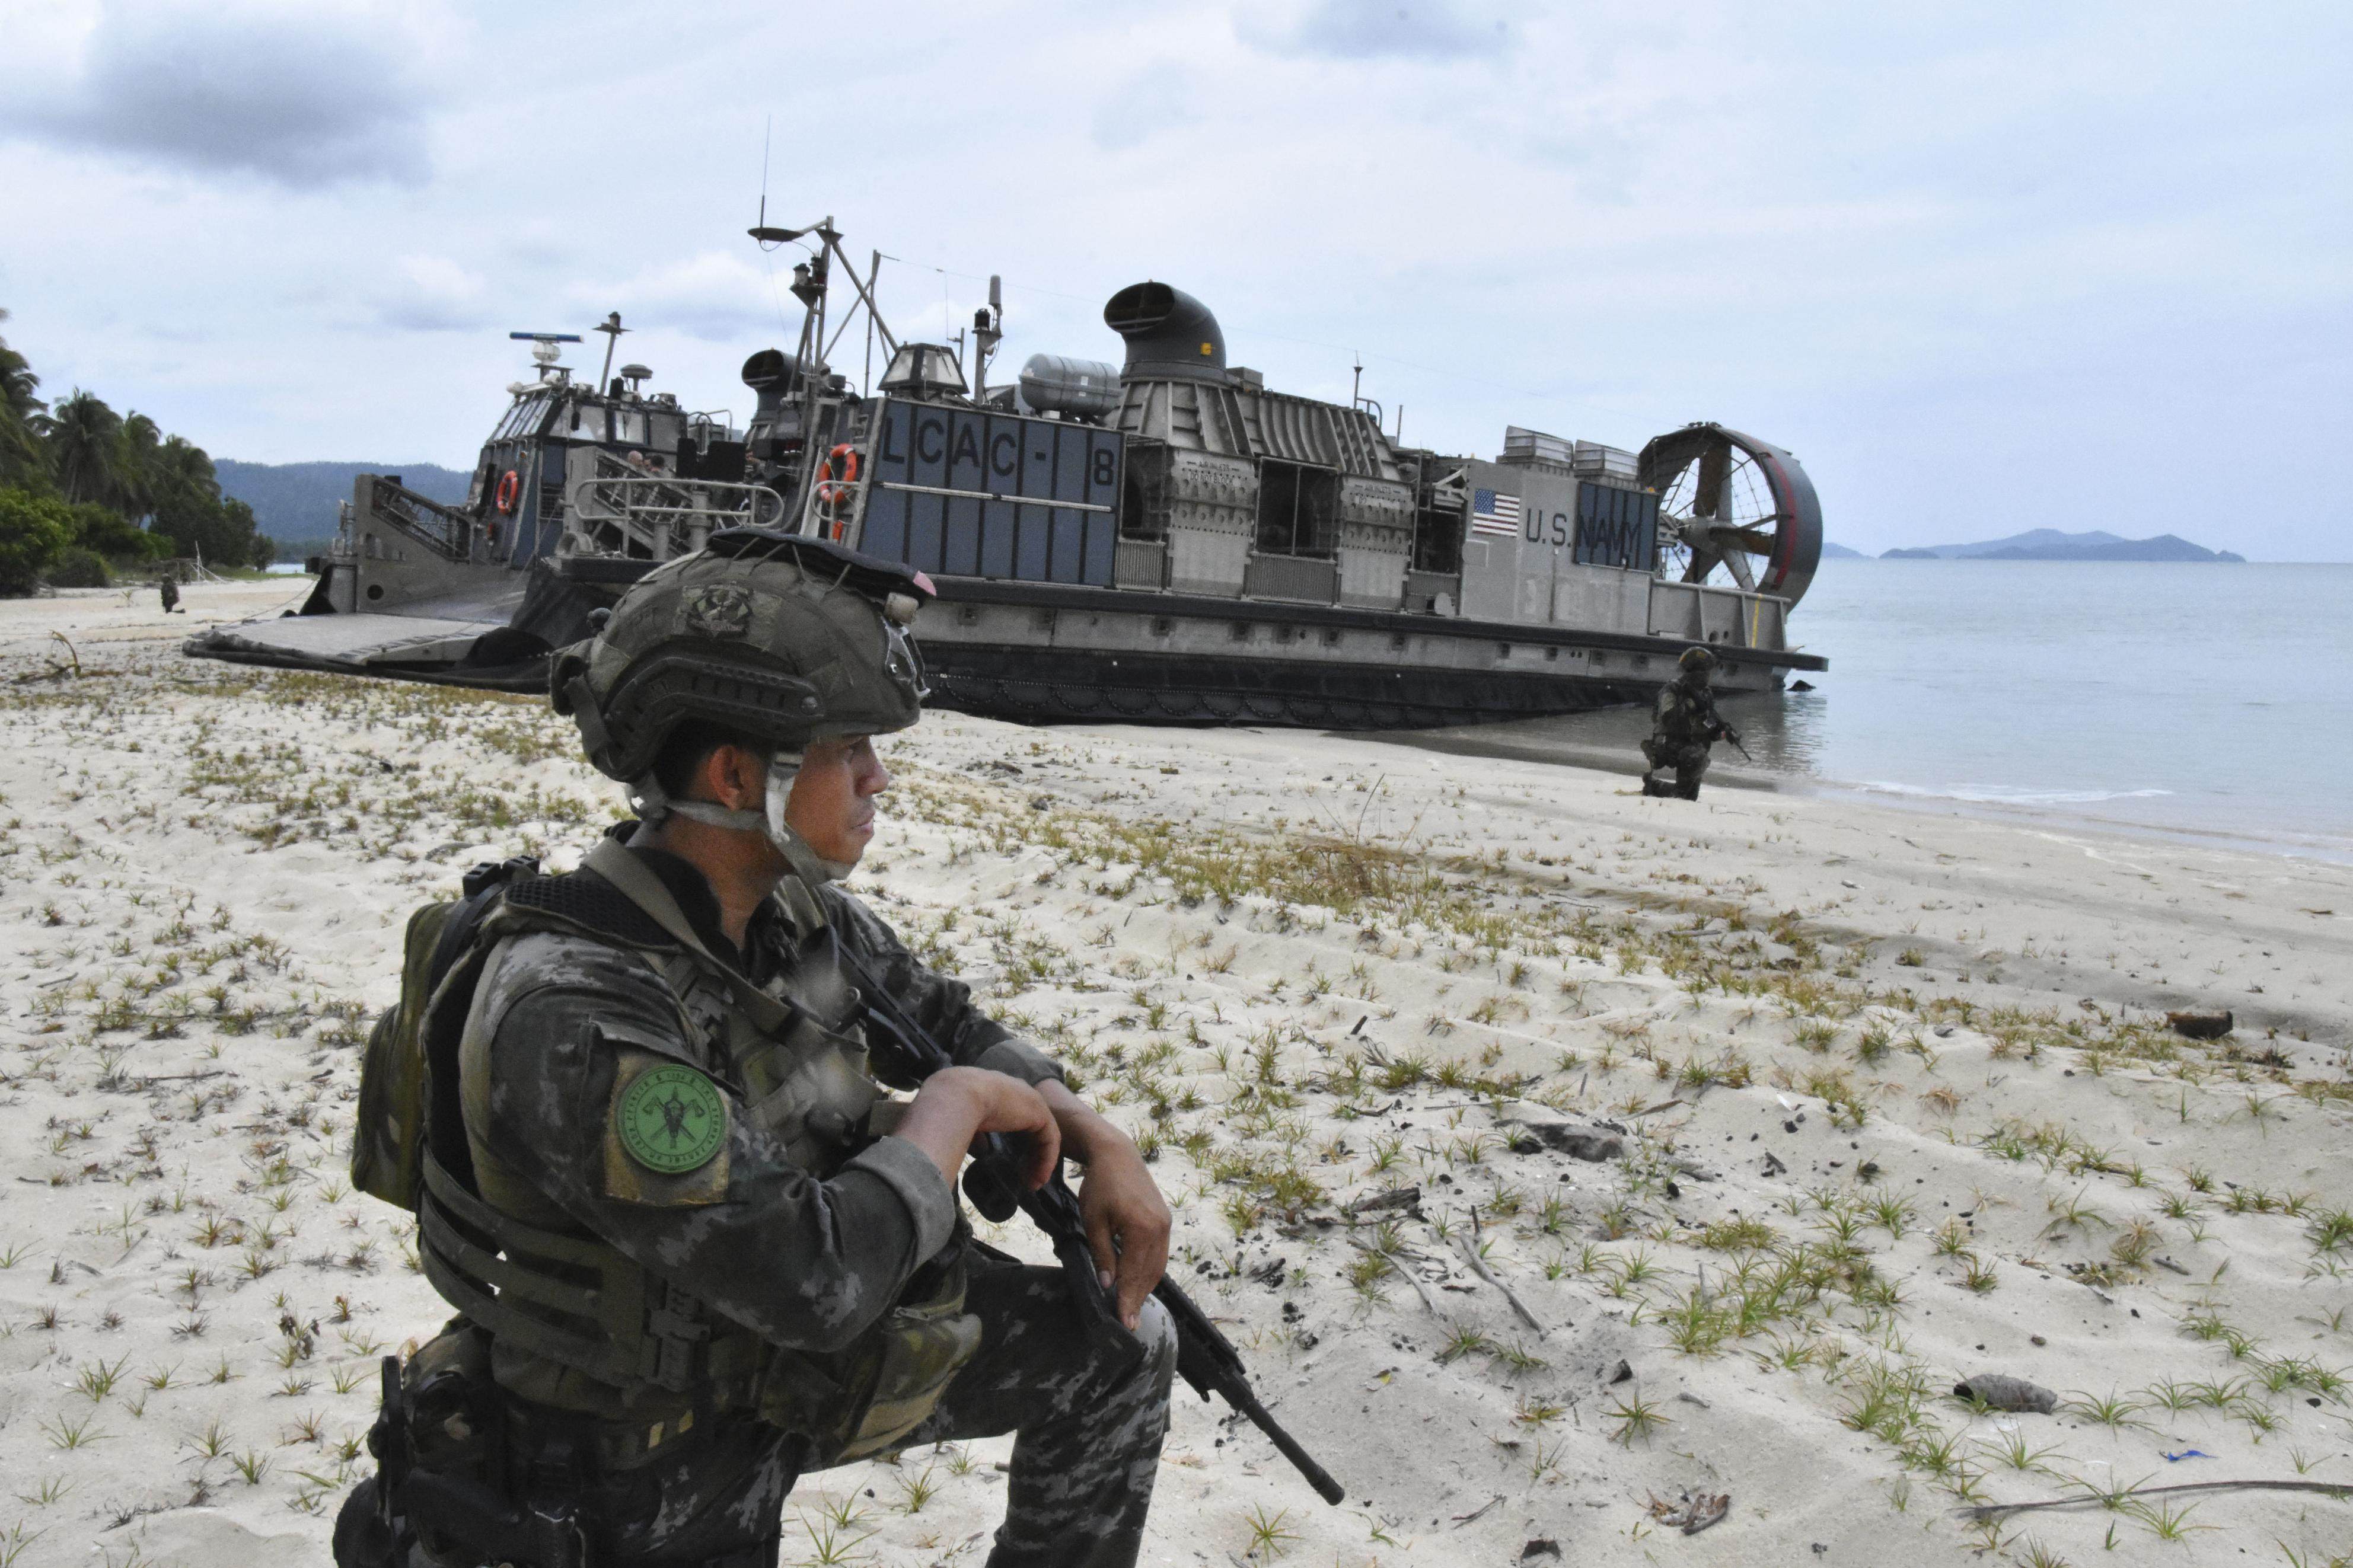 Philippine soldiers guard a US military hovercraft during a joint military exercise in Palawan province on May 1. Photo: Kyodo